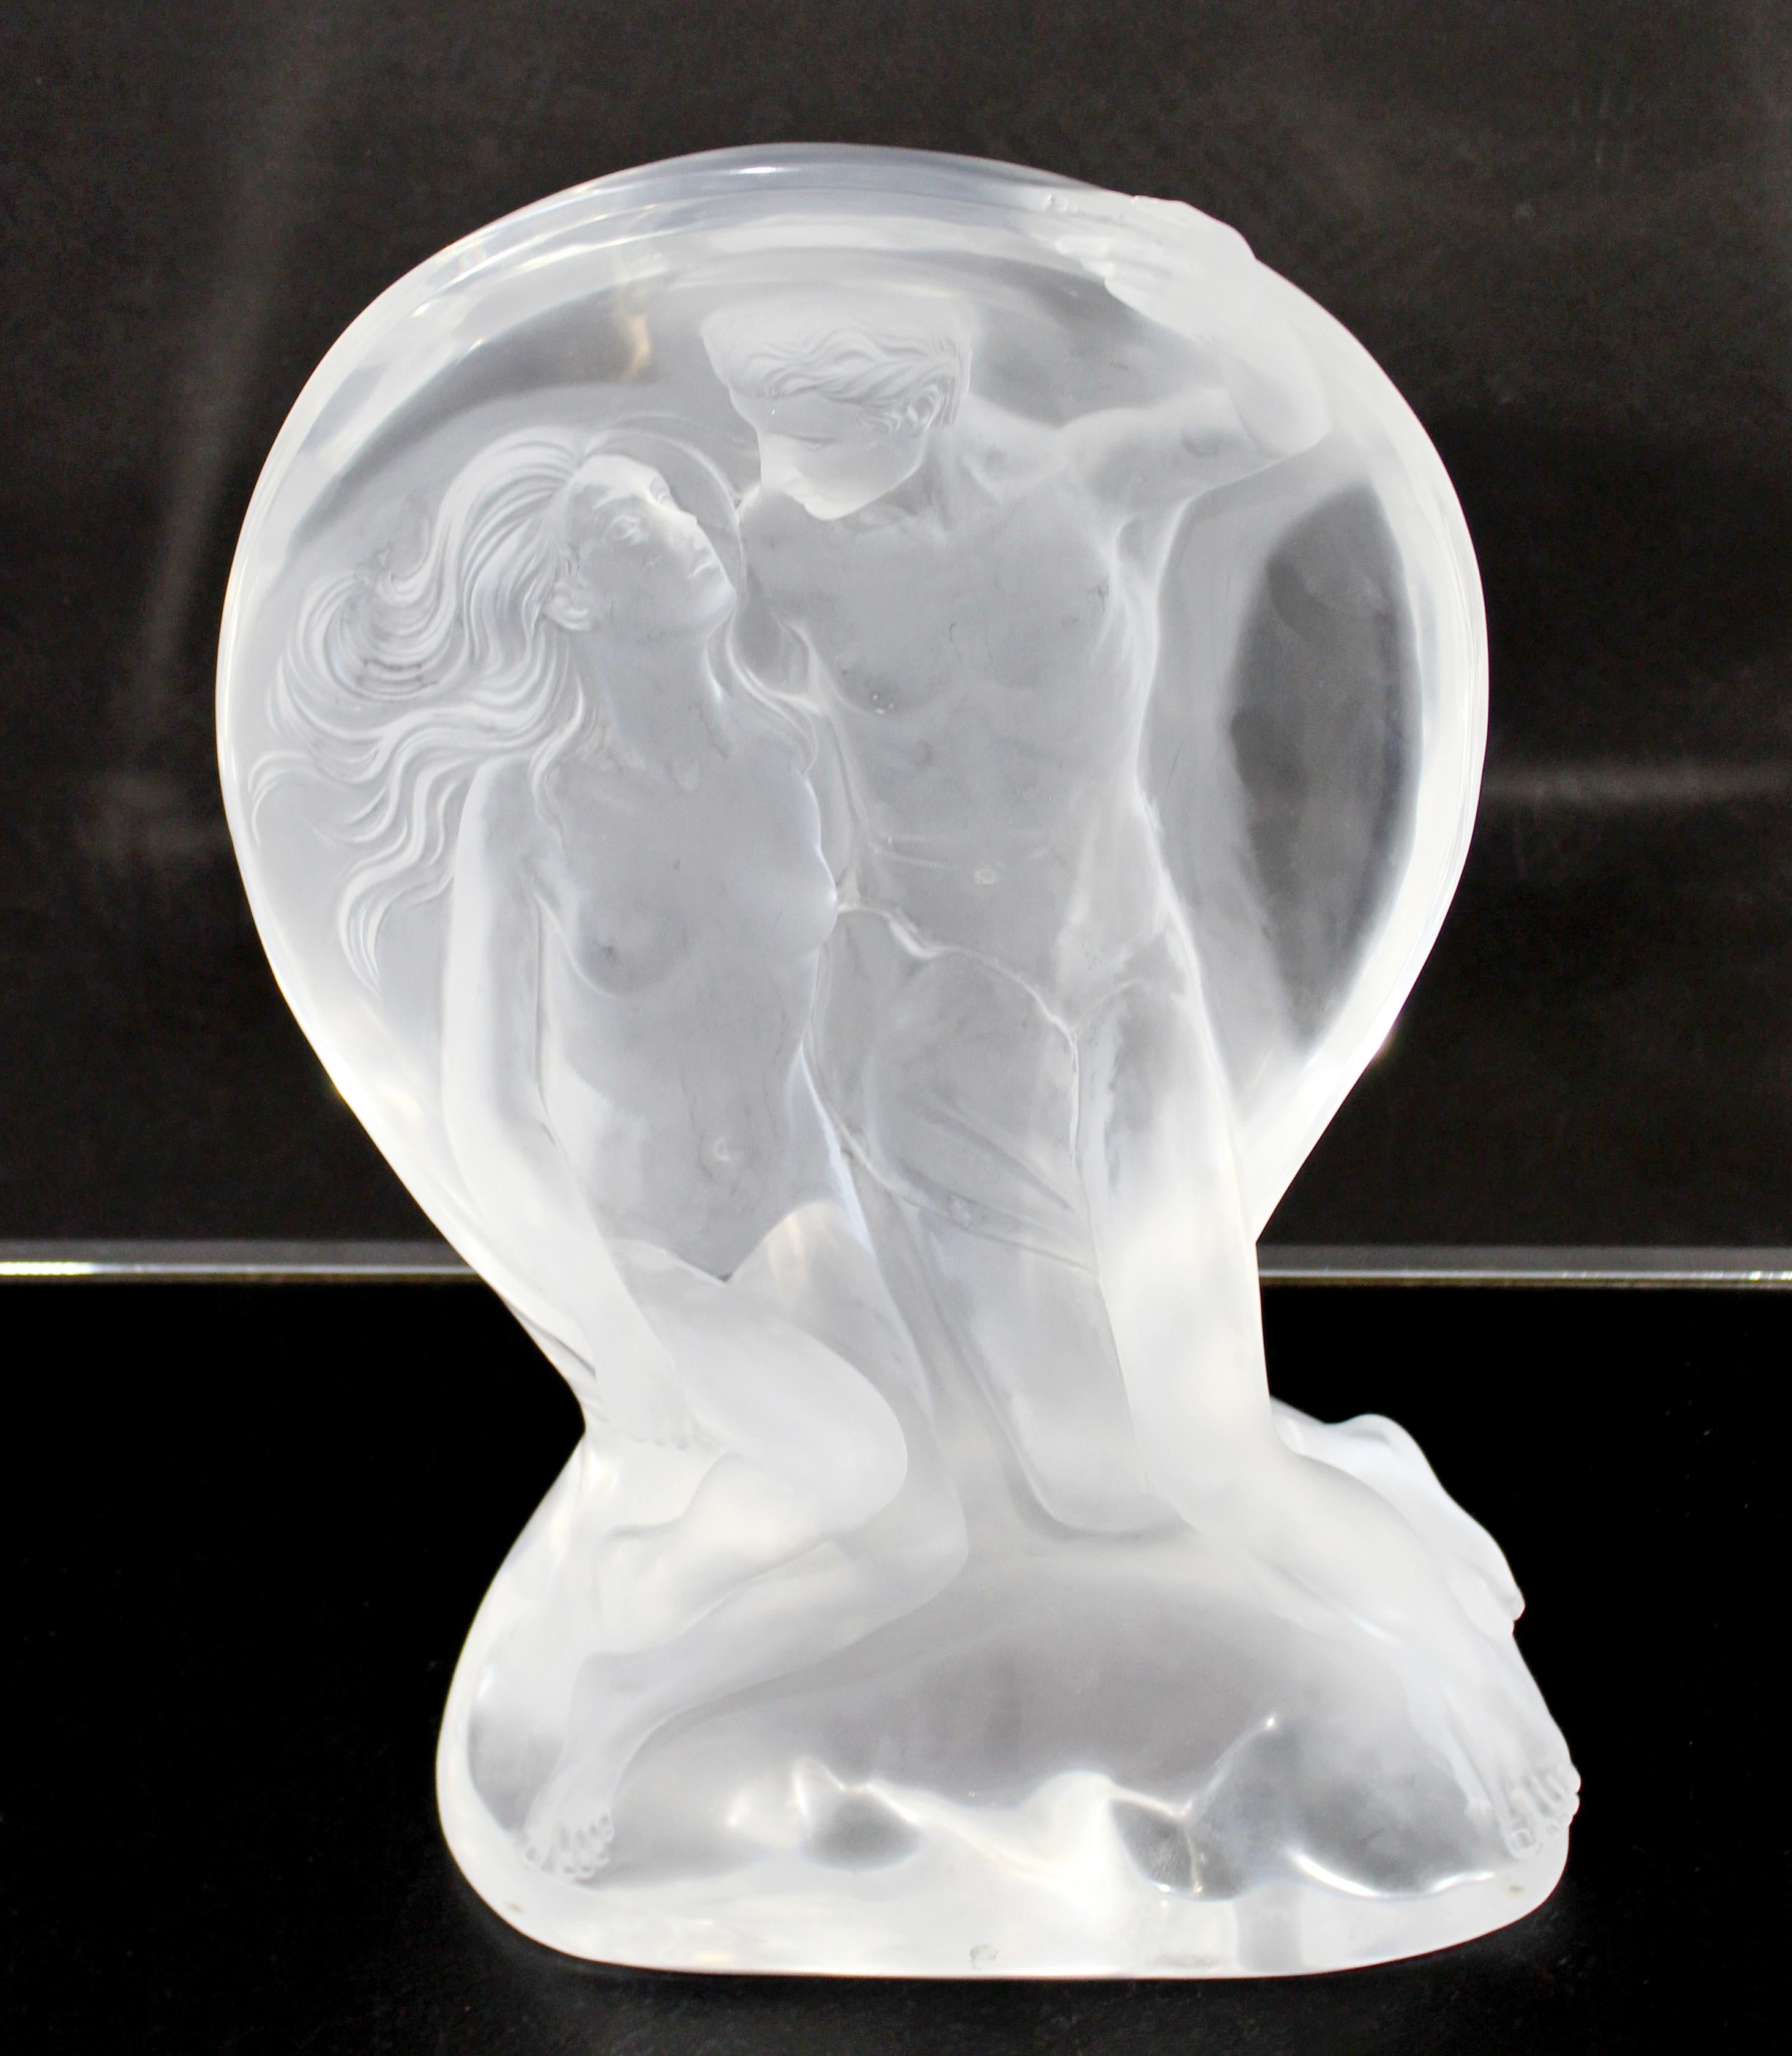 For your consideration is an a romantic, Lucite table sculpture of a couple, signed by Frederick E. Hart, entitled 